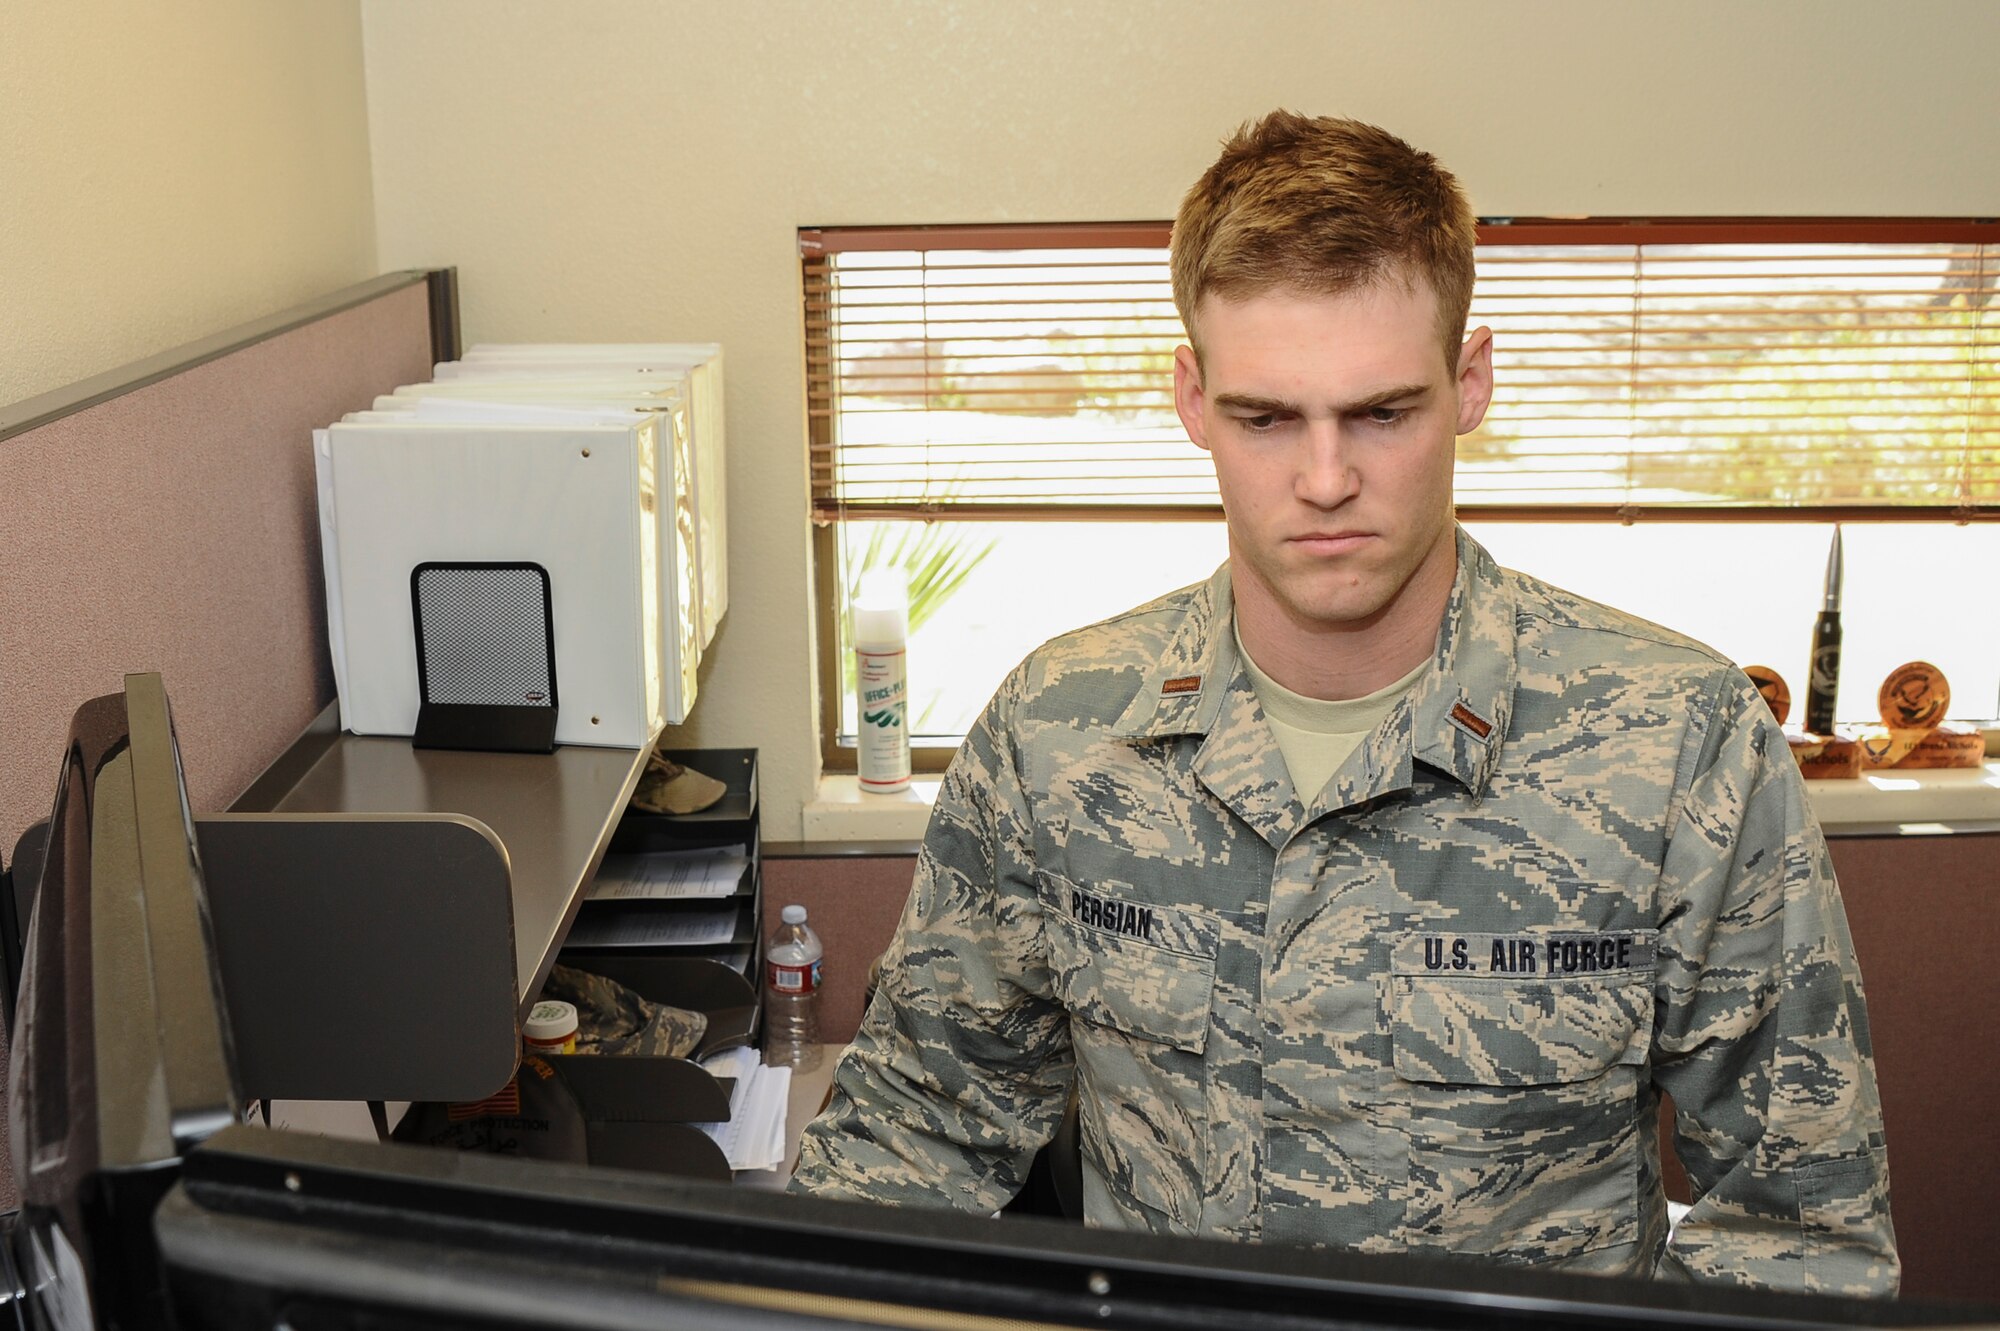 U.S. Air Force 2nd Lt. Benjamin Persian, 355th Contracting Squadron contract administrator, utilizes a standing desk at Davis-Monthan Air Force Base, Ariz., Feb. 17, 2016. Persian presented the idea of standing desks during the first ever Innovate DLT event. The standing desks were presented as a solution to reduce stress, possible injuries and disorders associated with overused muscles, bad posture and repeated tasks for people that work at a desk with certain health concerns. (U.S. Air Force photo by Airman 1st Class Mya M. Crosby/Released)
